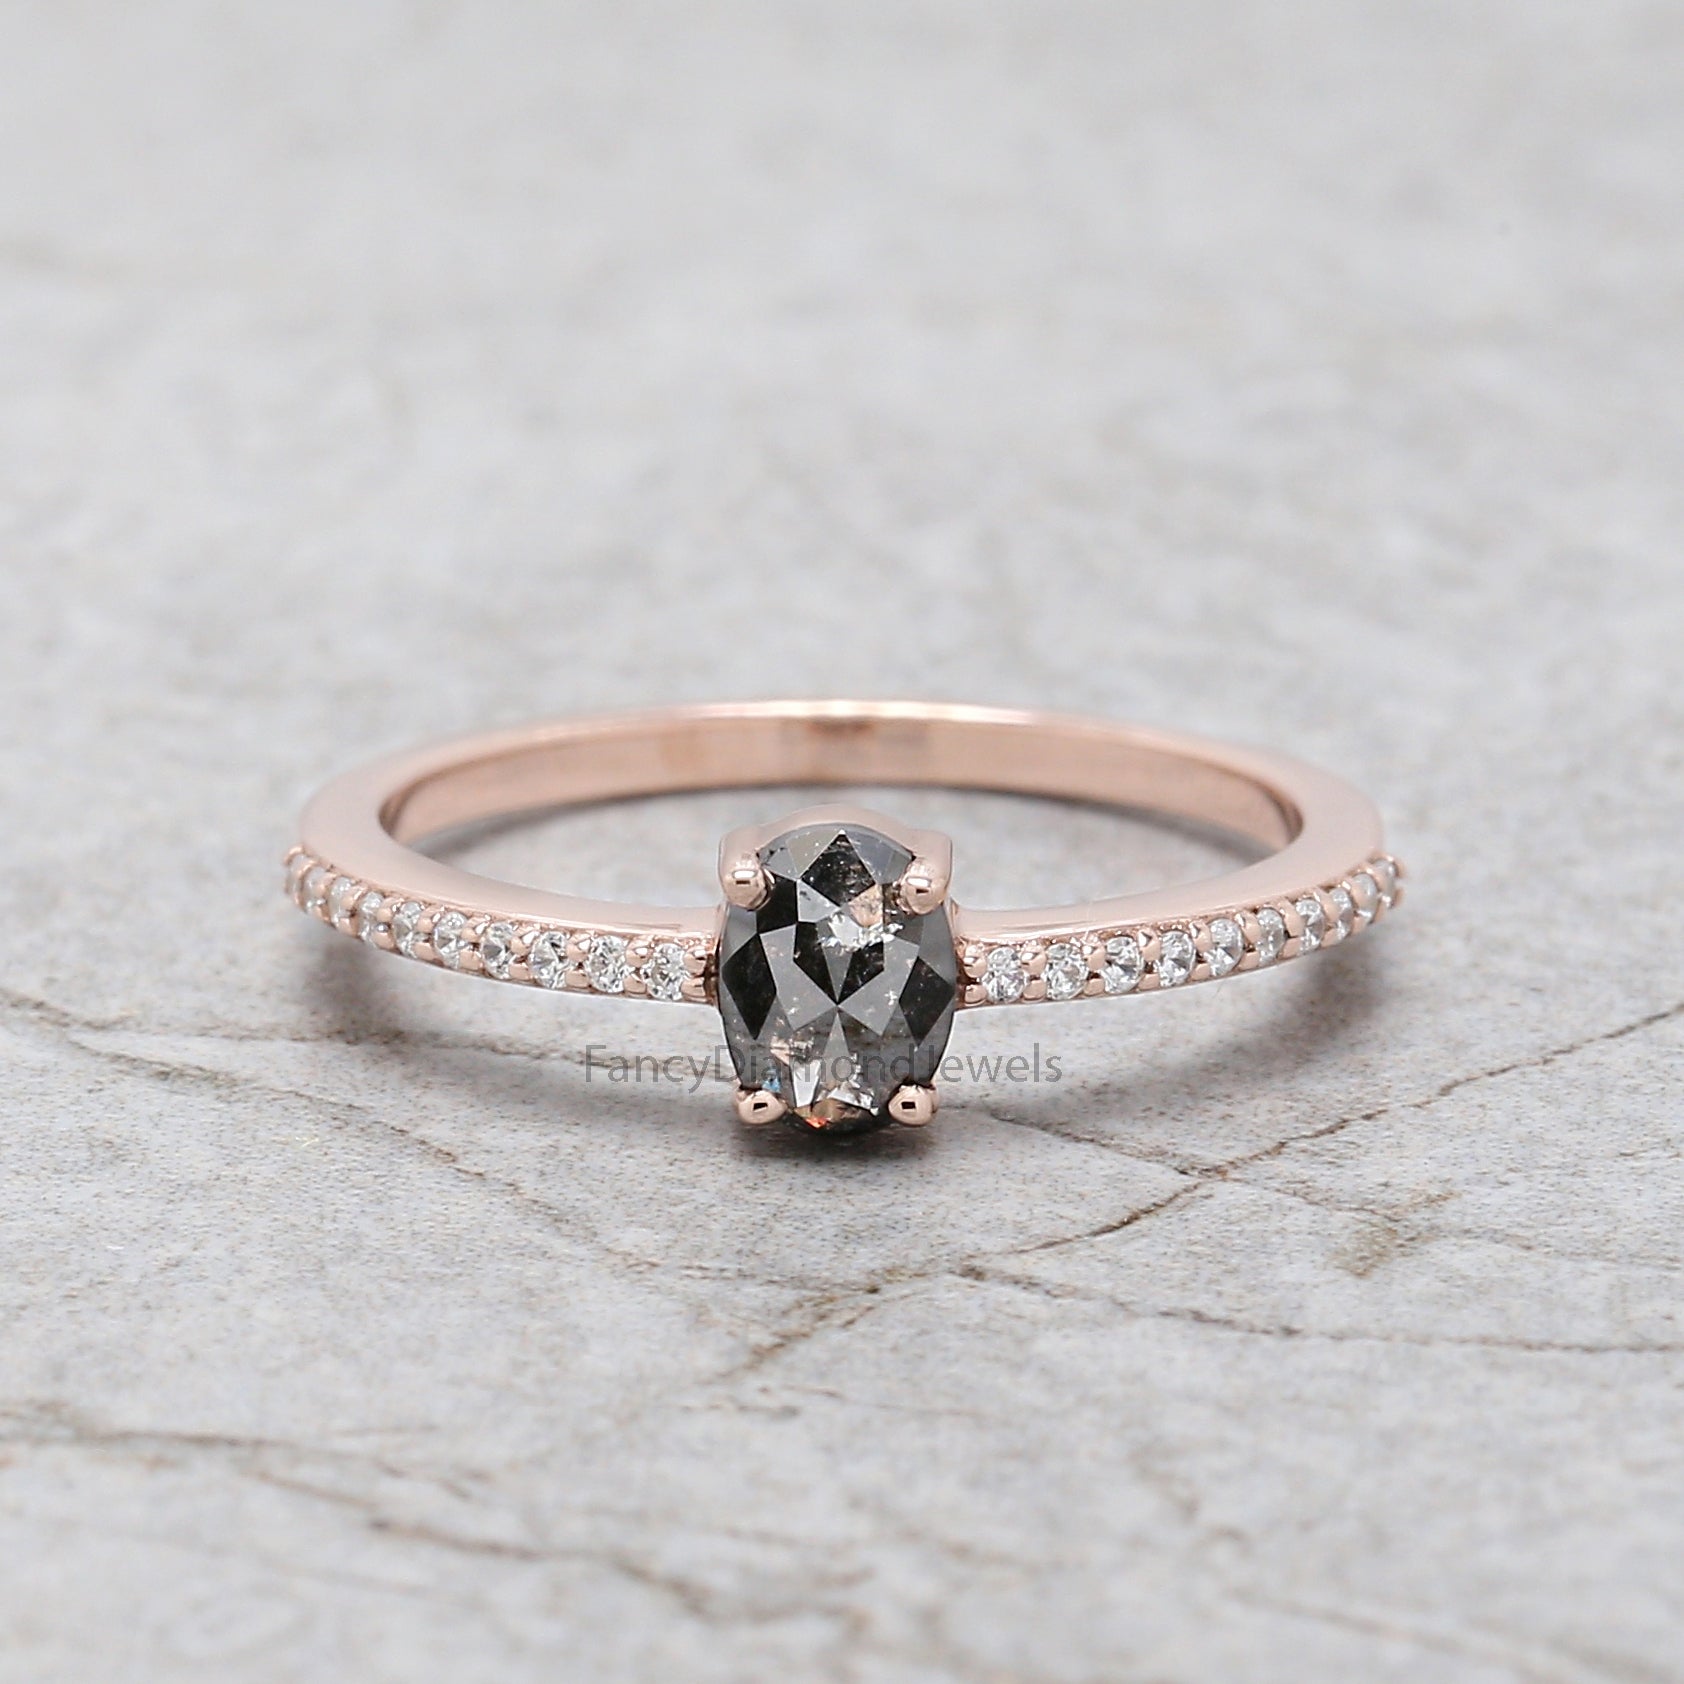 Oval Cut Salt And Pepper Diamond Ring 0.51 Ct 5.60 MM Oval Diamond Ring 14K Solid Rose Gold Silver Oval Engagement Ring Gift For Her QK2334